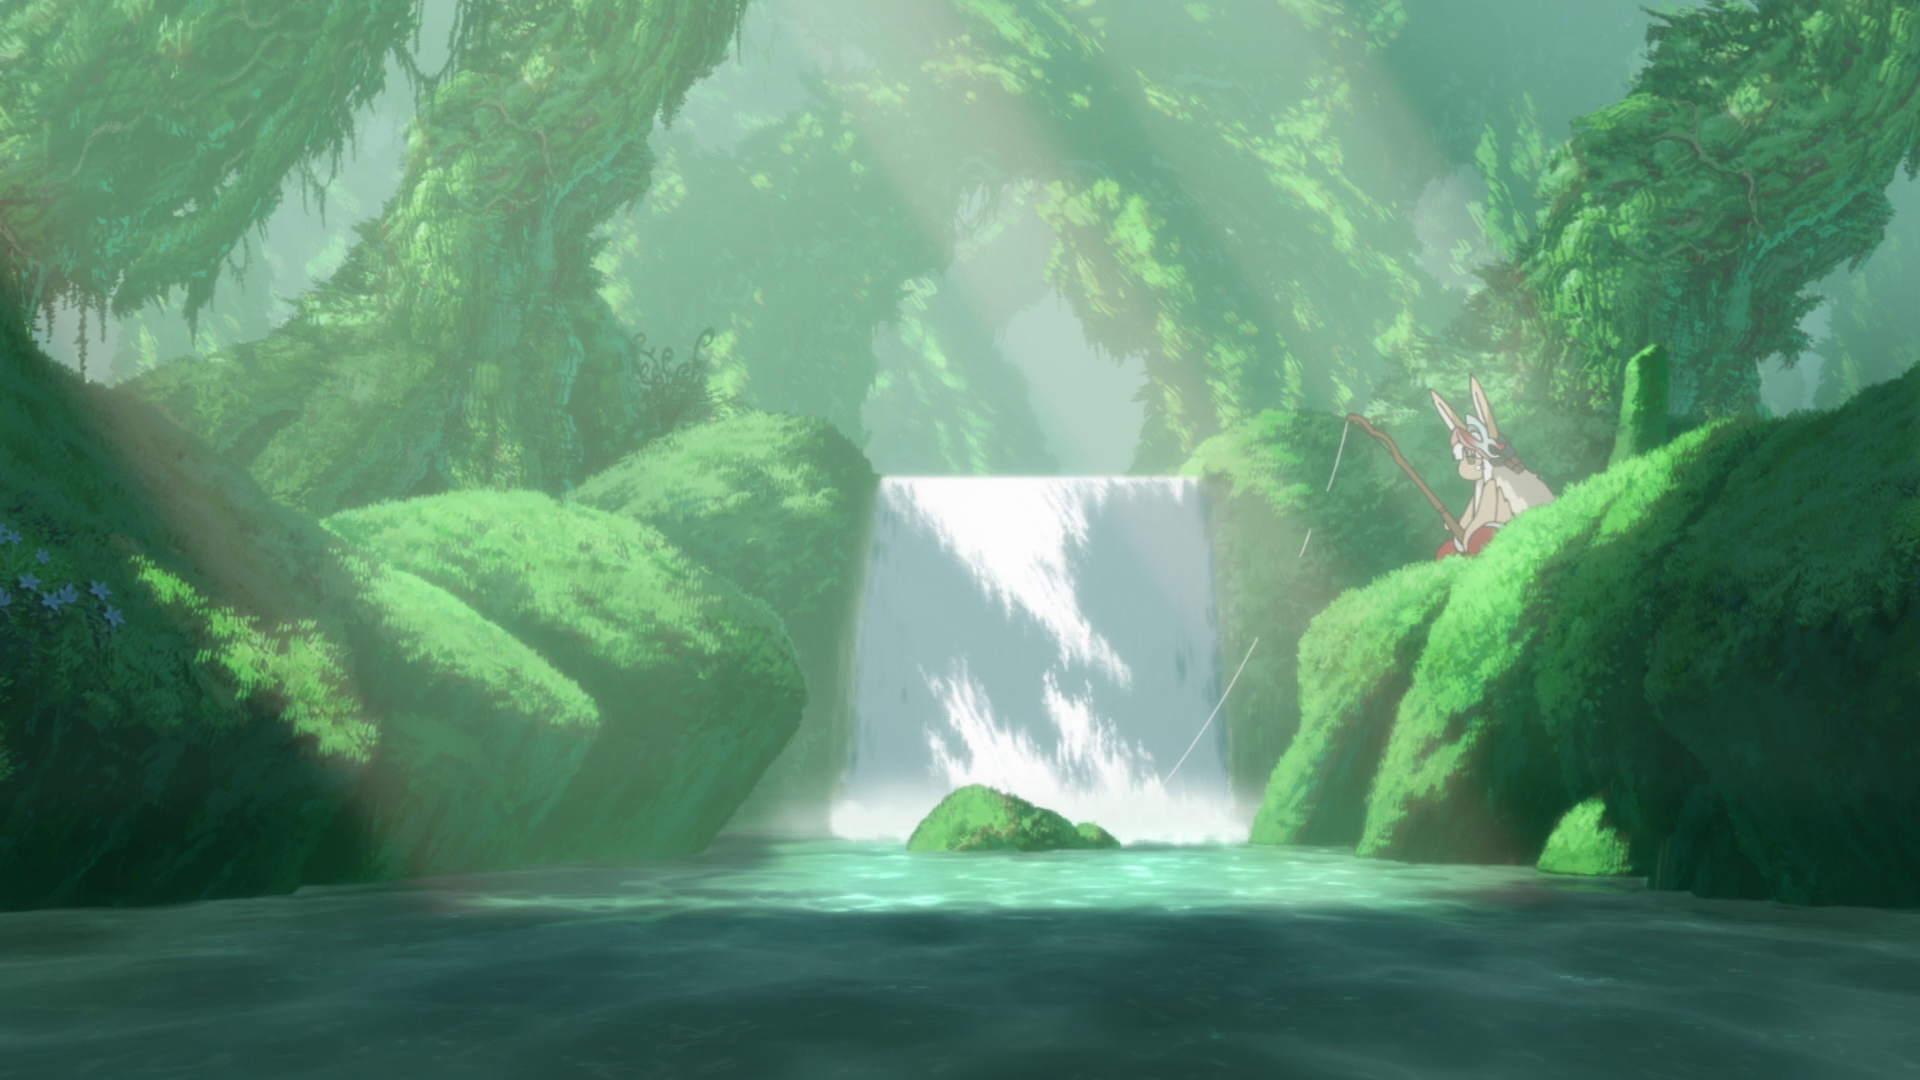 Wallpaper id nanachi made in abyss environment river waterfall made in abyss fishing rod anime free download